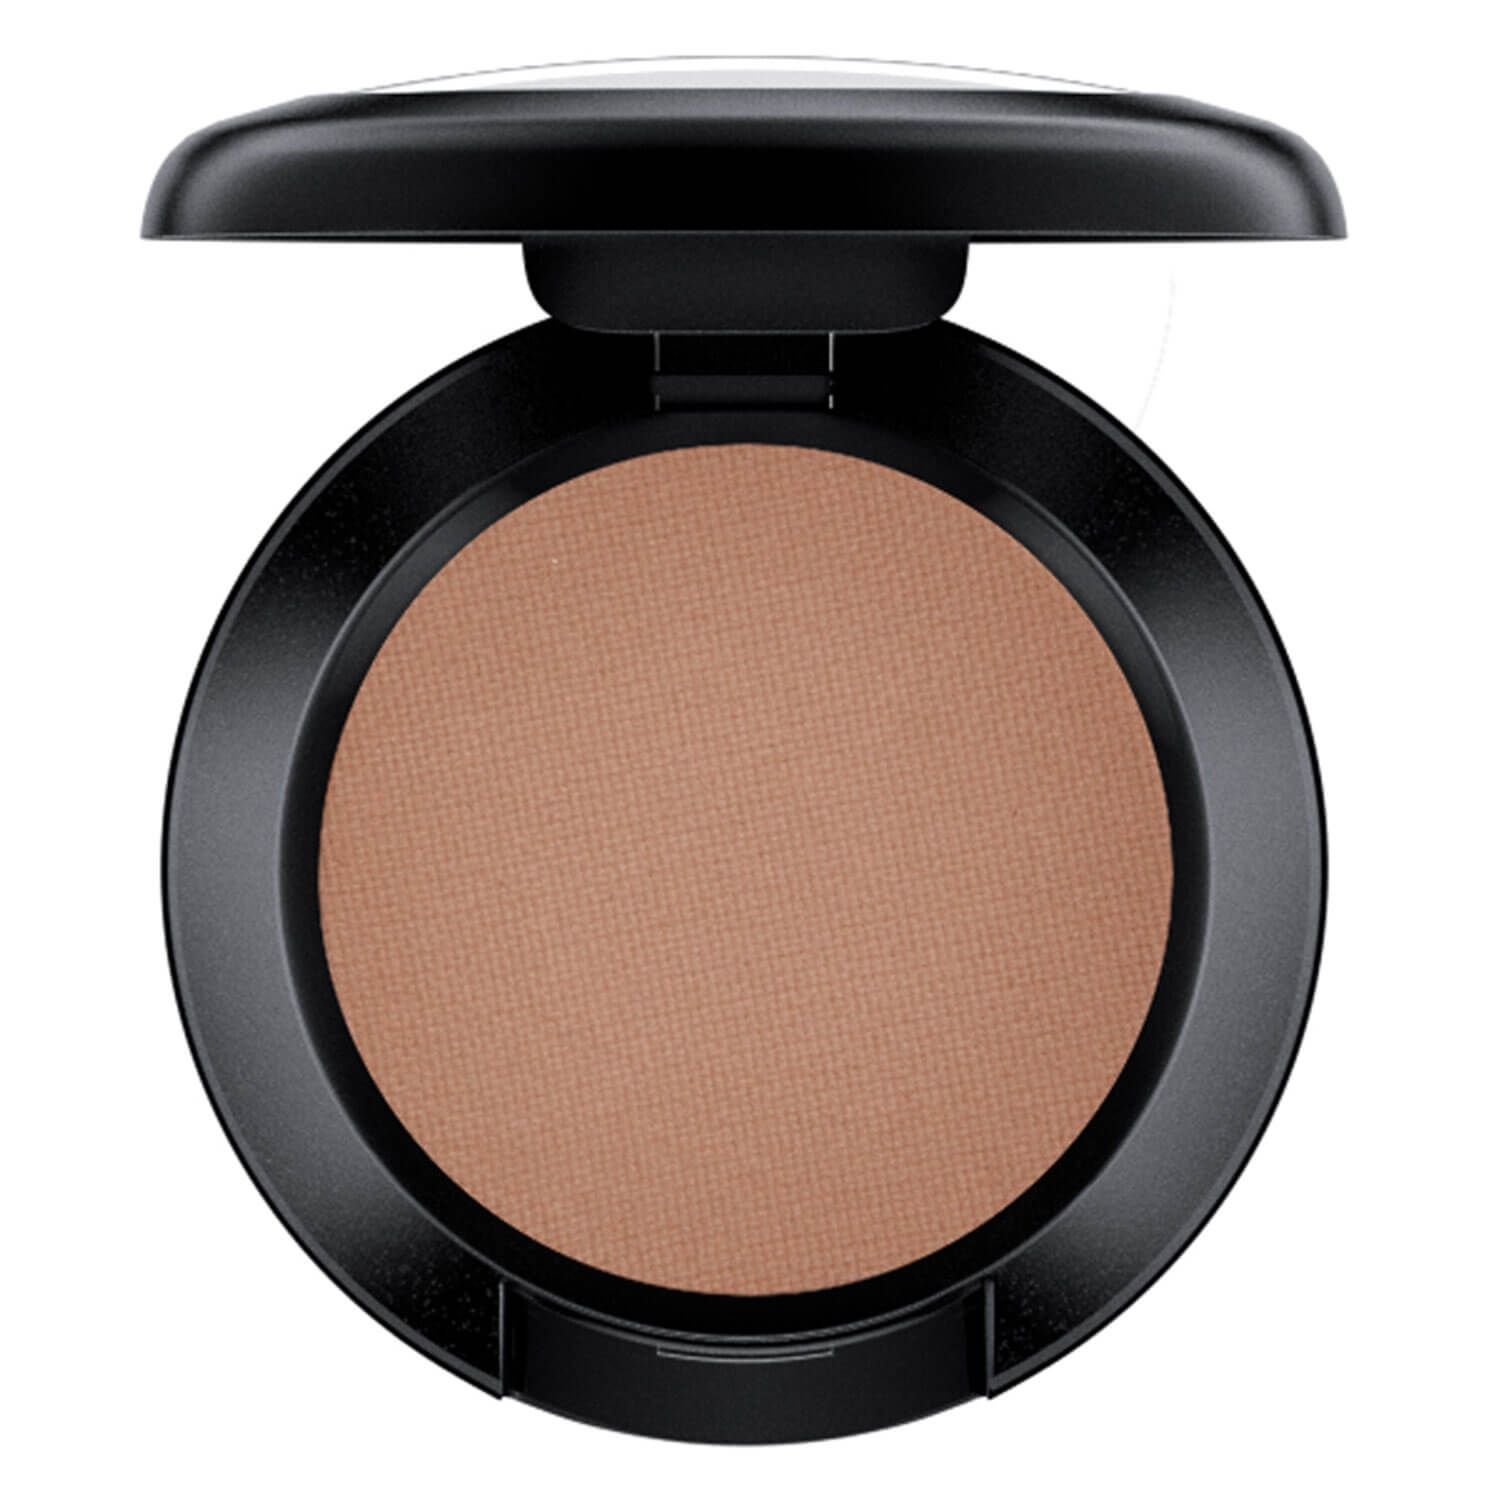 Product image from Visual Arts - Small Eye Shadow Matte Sandstone